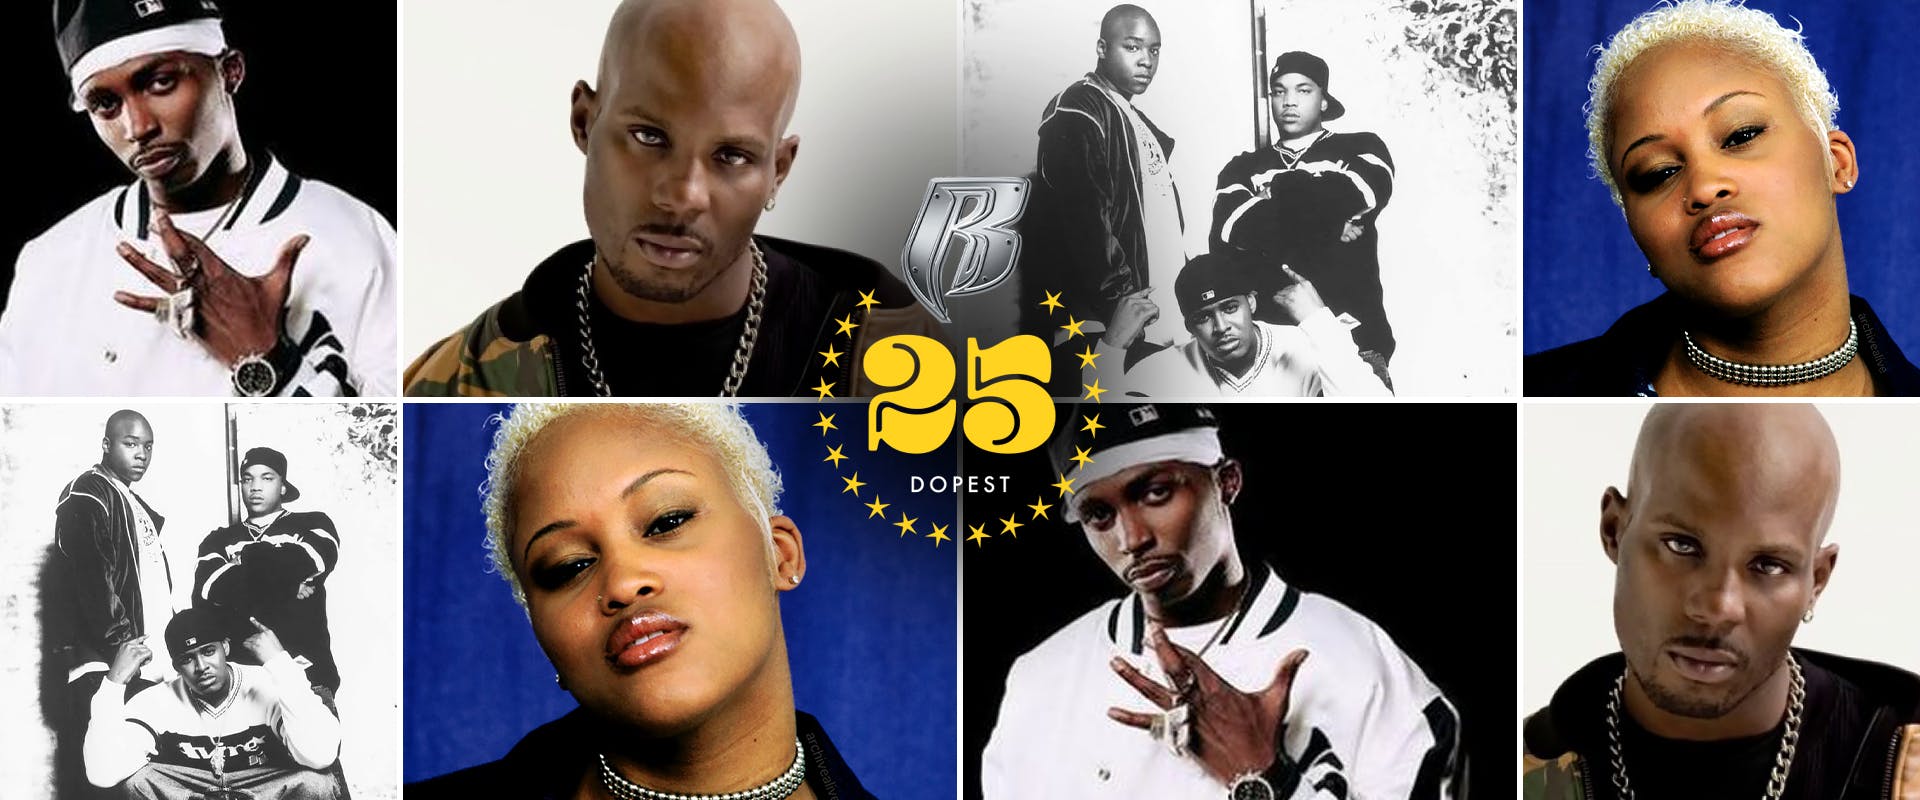 THE 25 DOPEST RUFF RYDERS SONGS